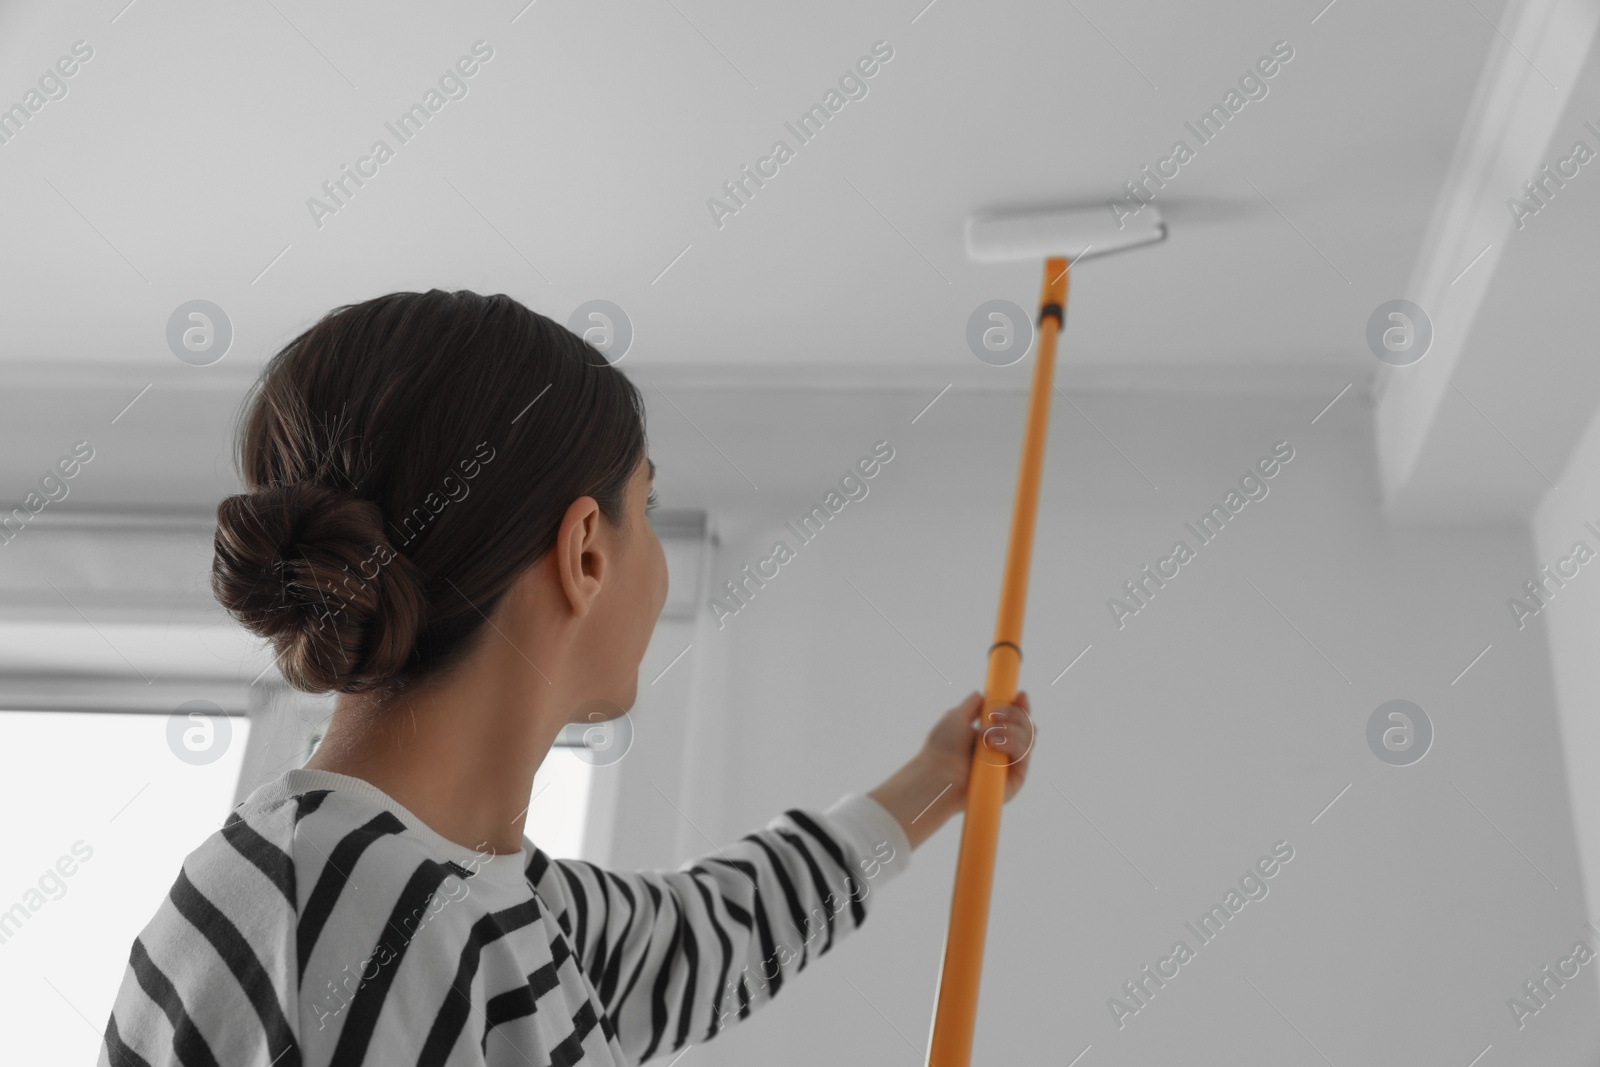 Photo of Young woman painting ceiling with white dye indoors, back view